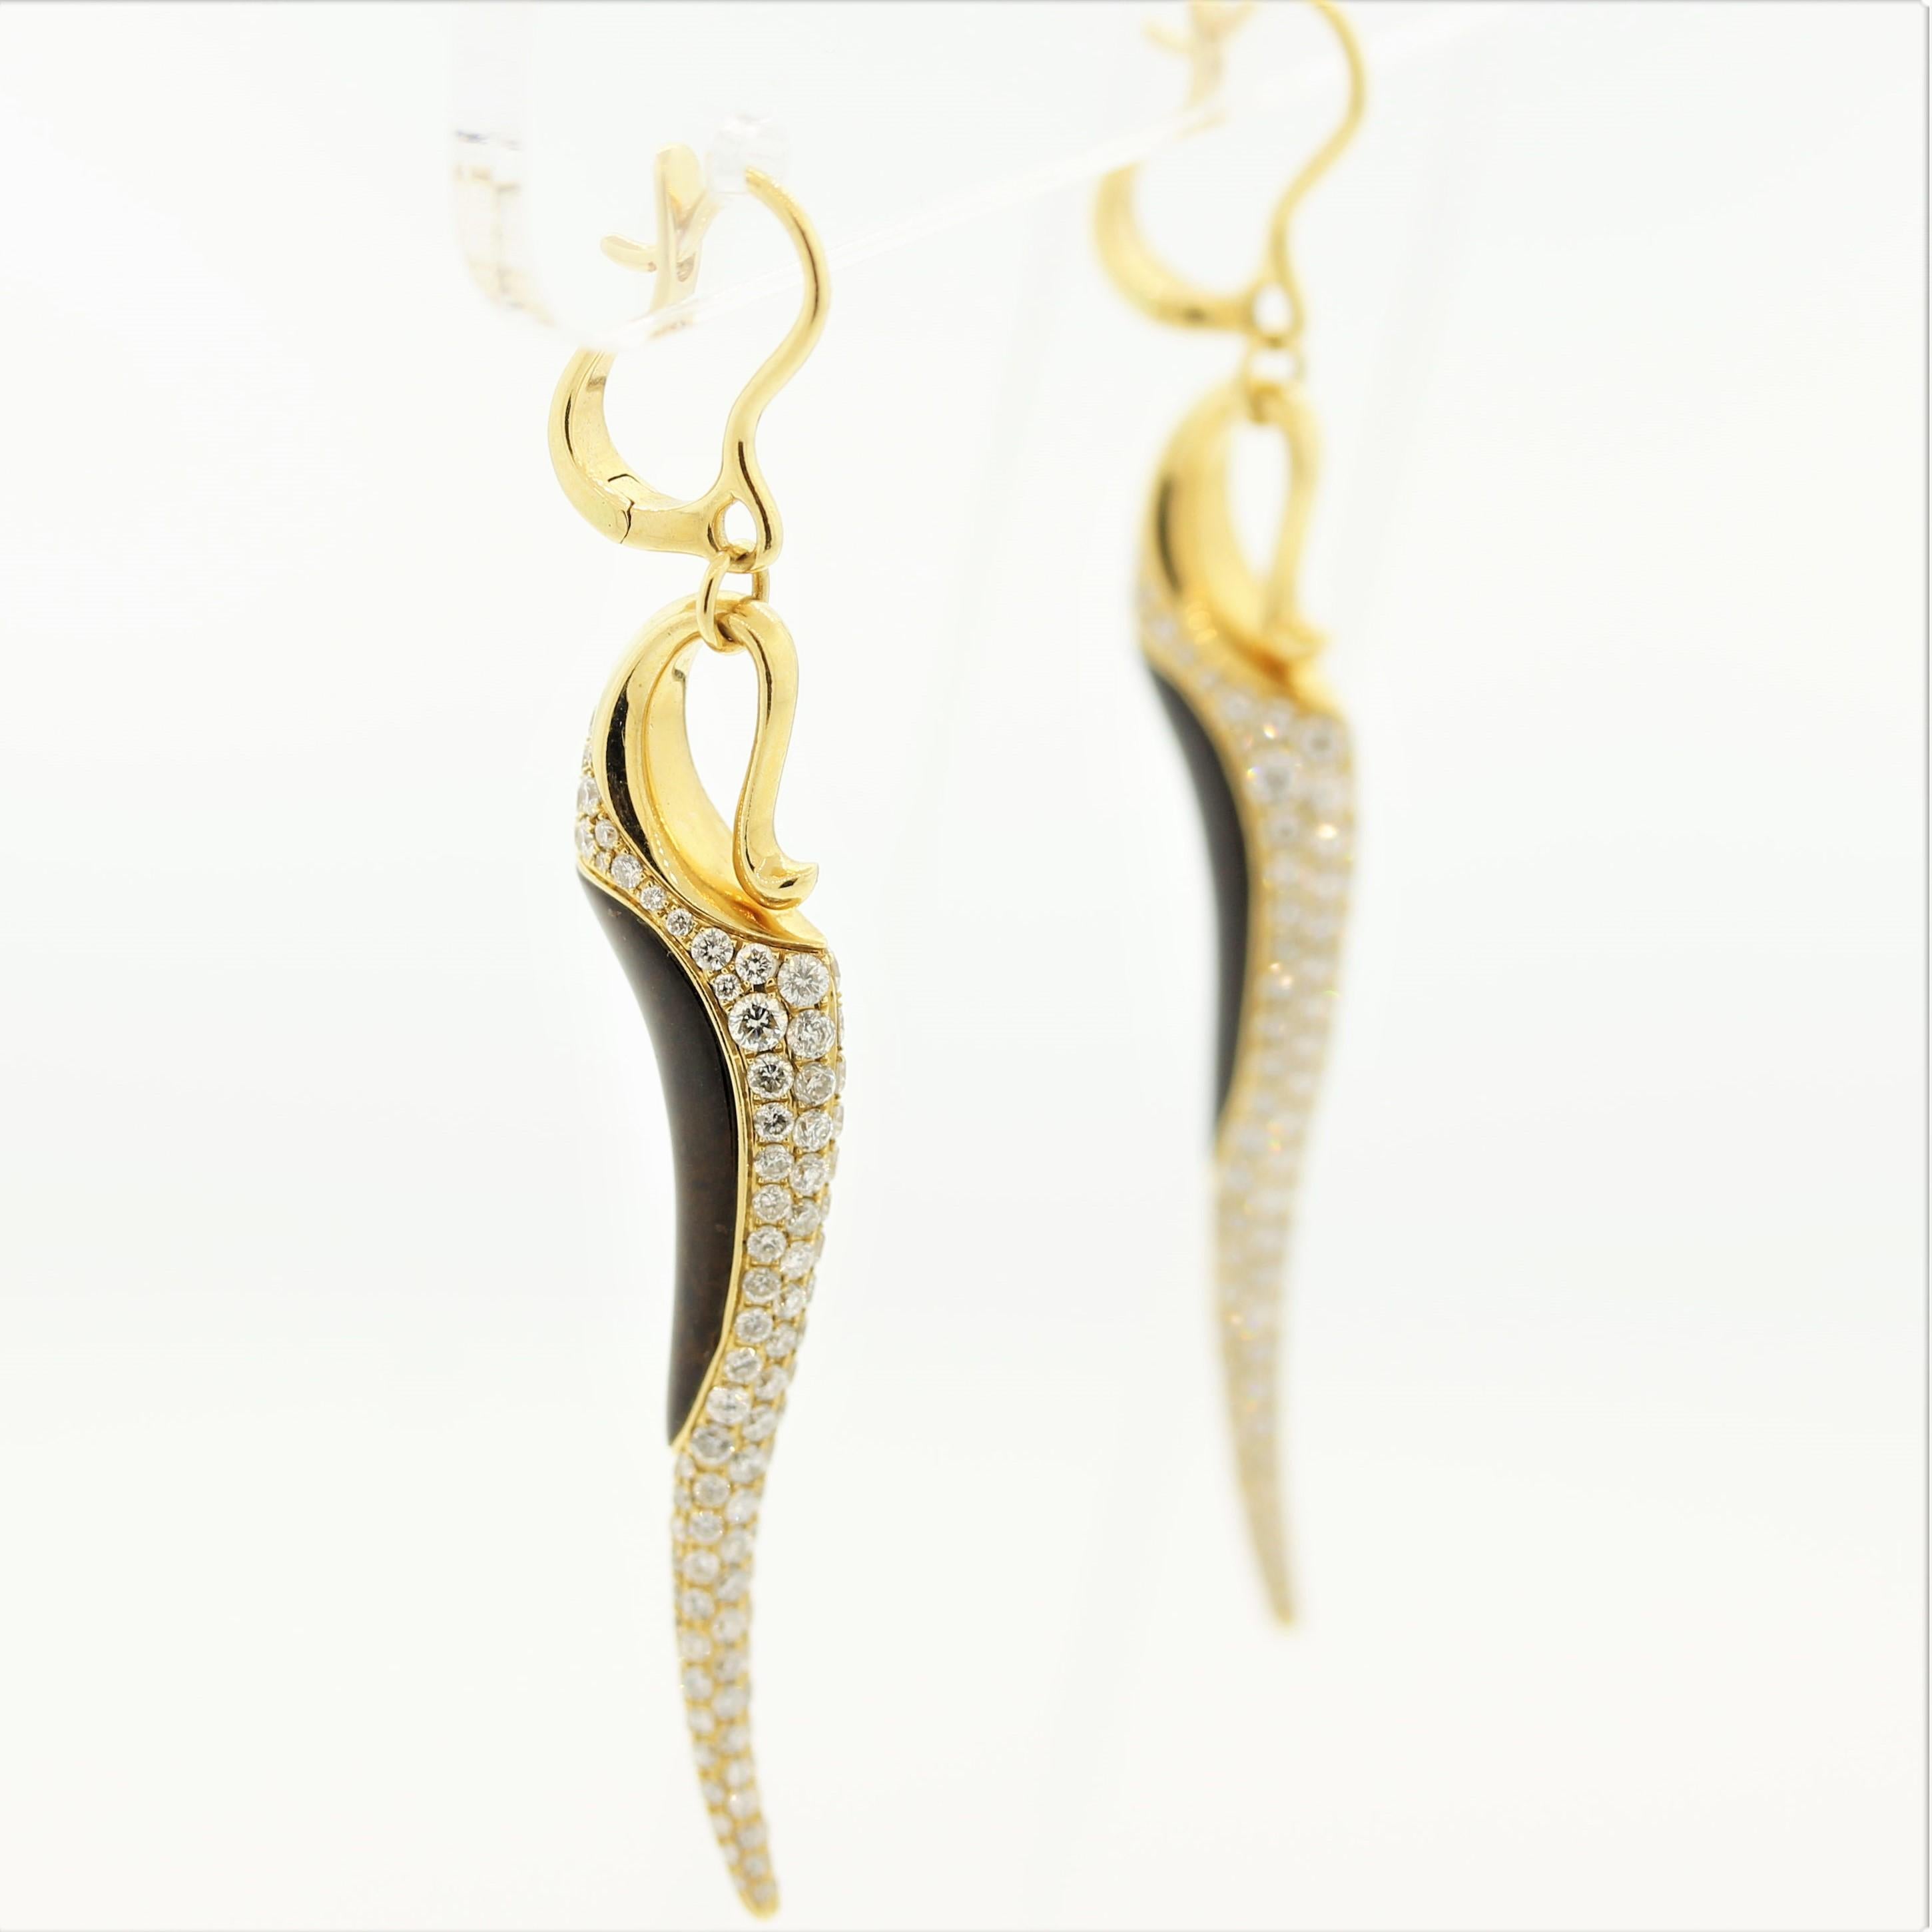 A sleek and sexy pair of earrings! They feature 2.75 carats of fine round brilliant-cut diamonds which are pave-set across the earrings. Accenting the diamonds are 7.62 carat of tiger’s eye which appears to change colors as the earrings are moved.